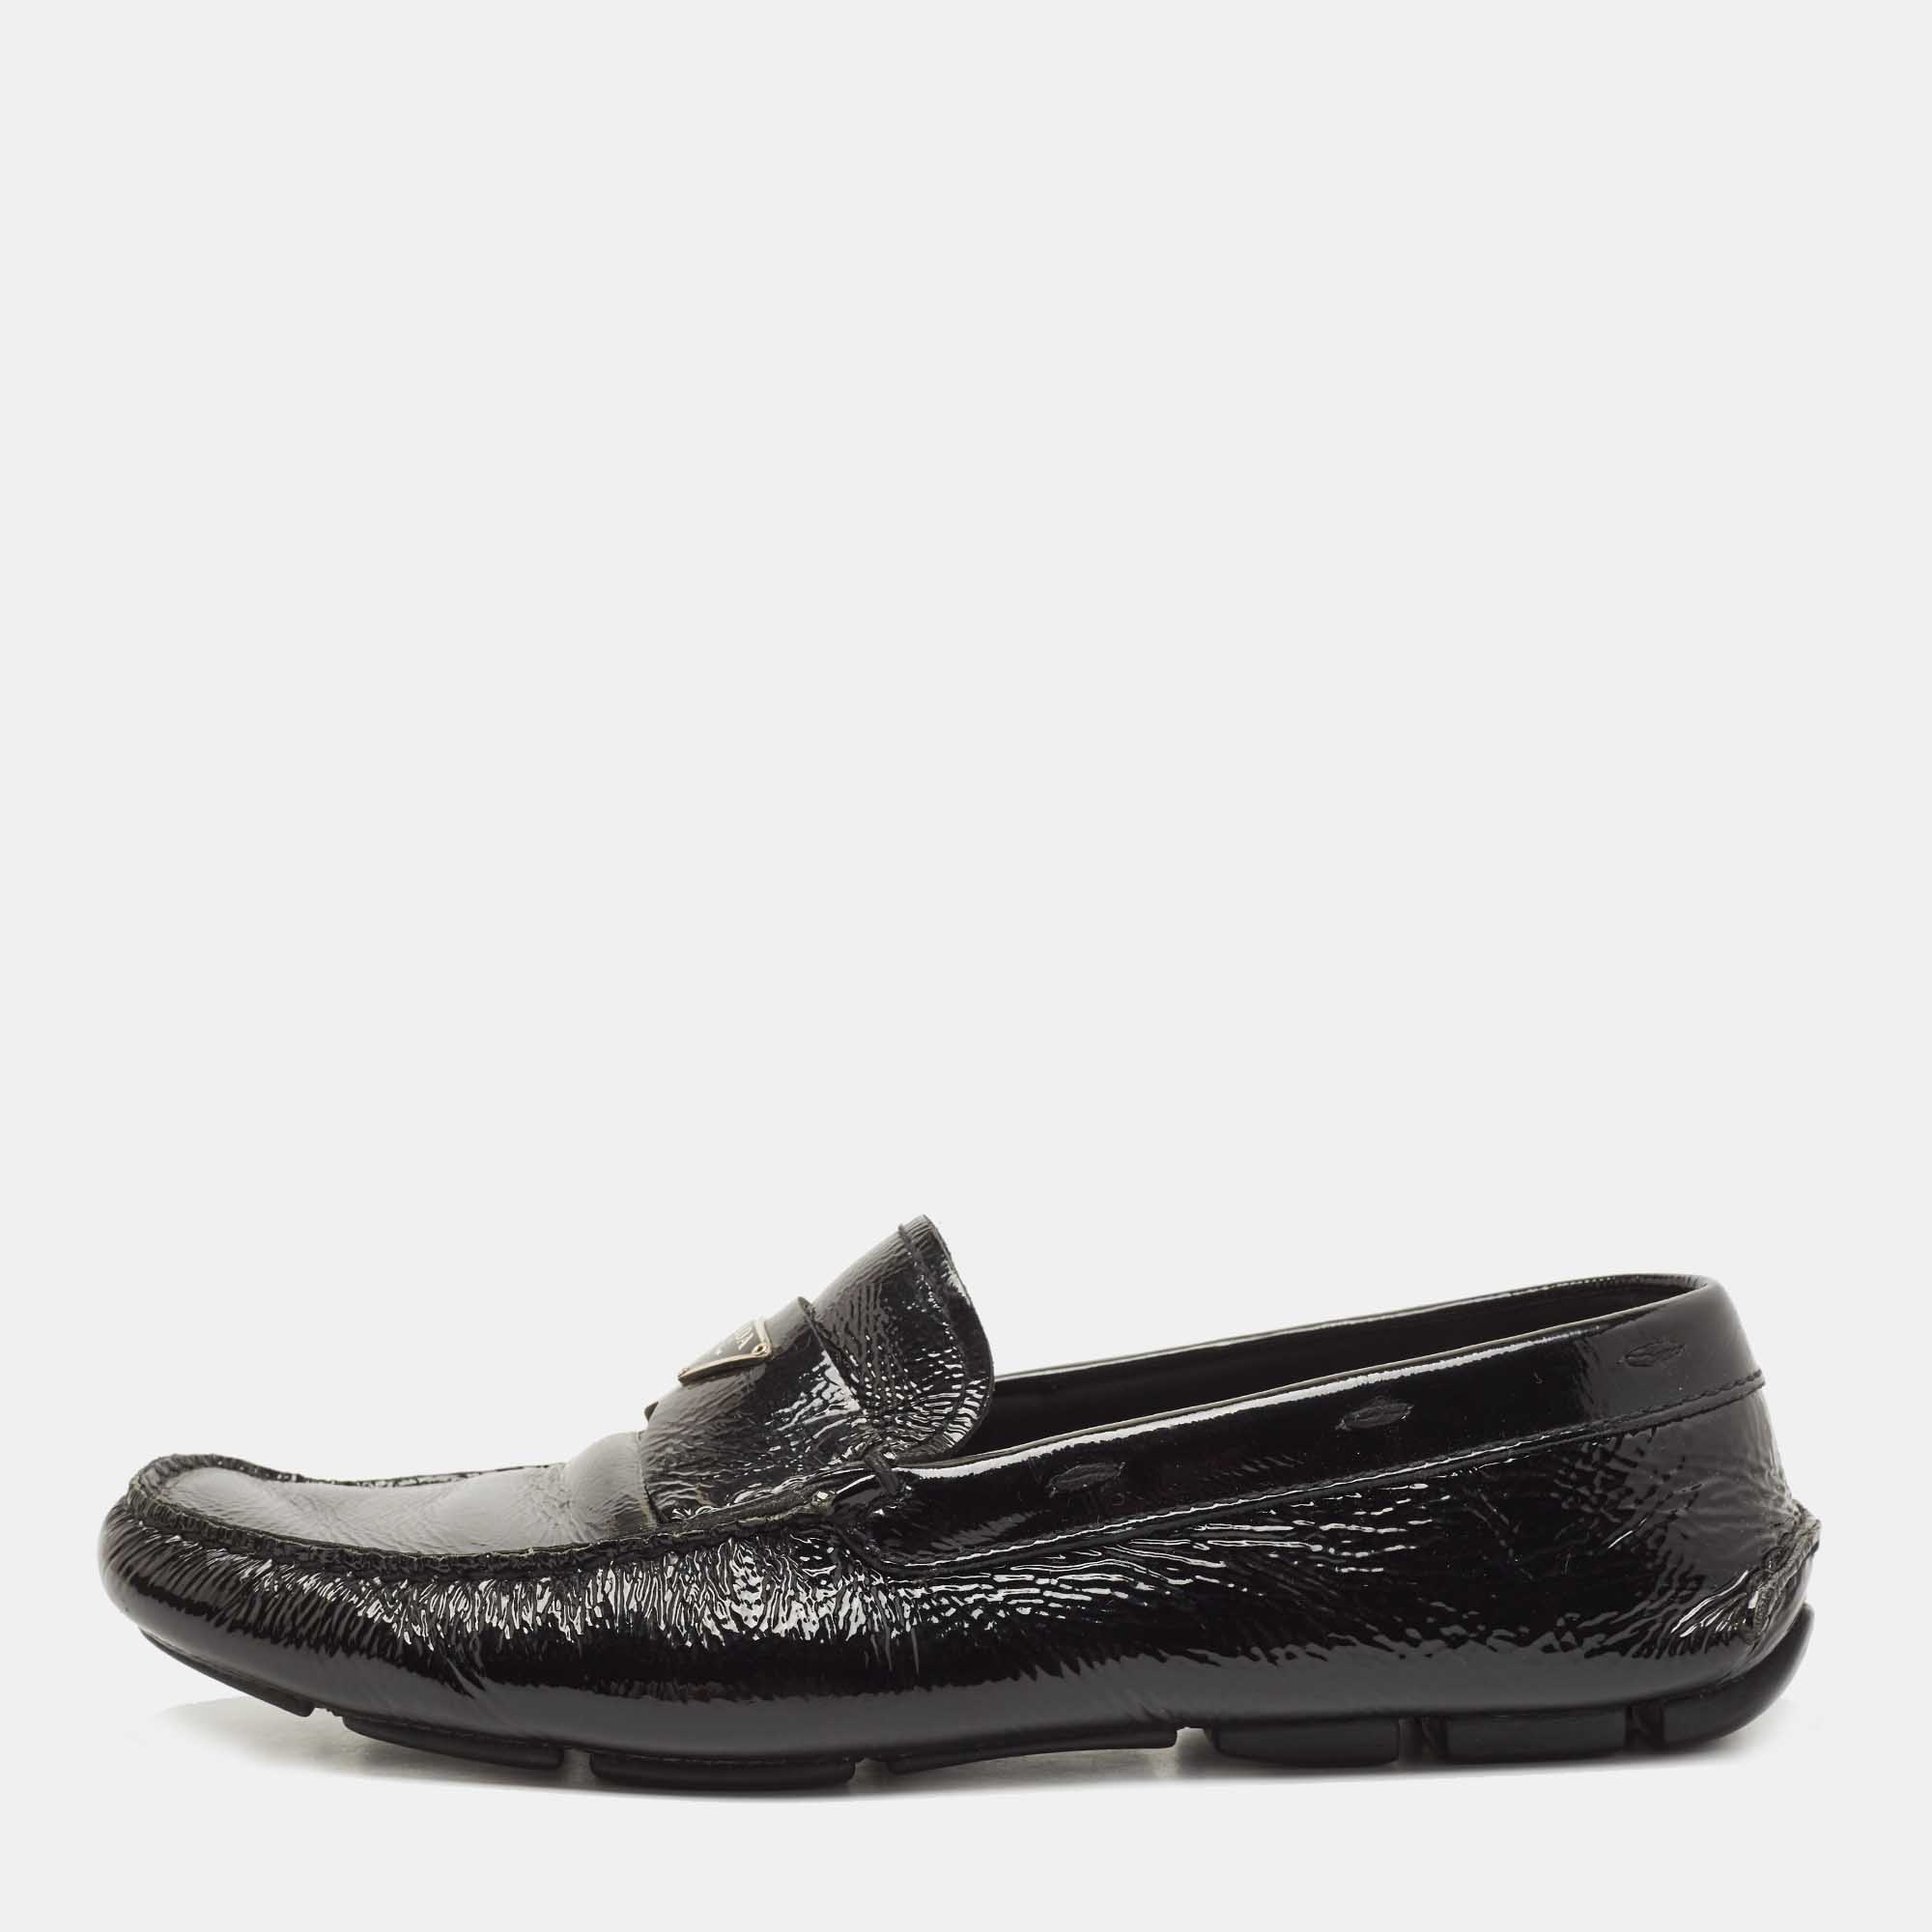 Pre-owned Prada Black Patent Leather Logo Slip On Loafers Size 41.5